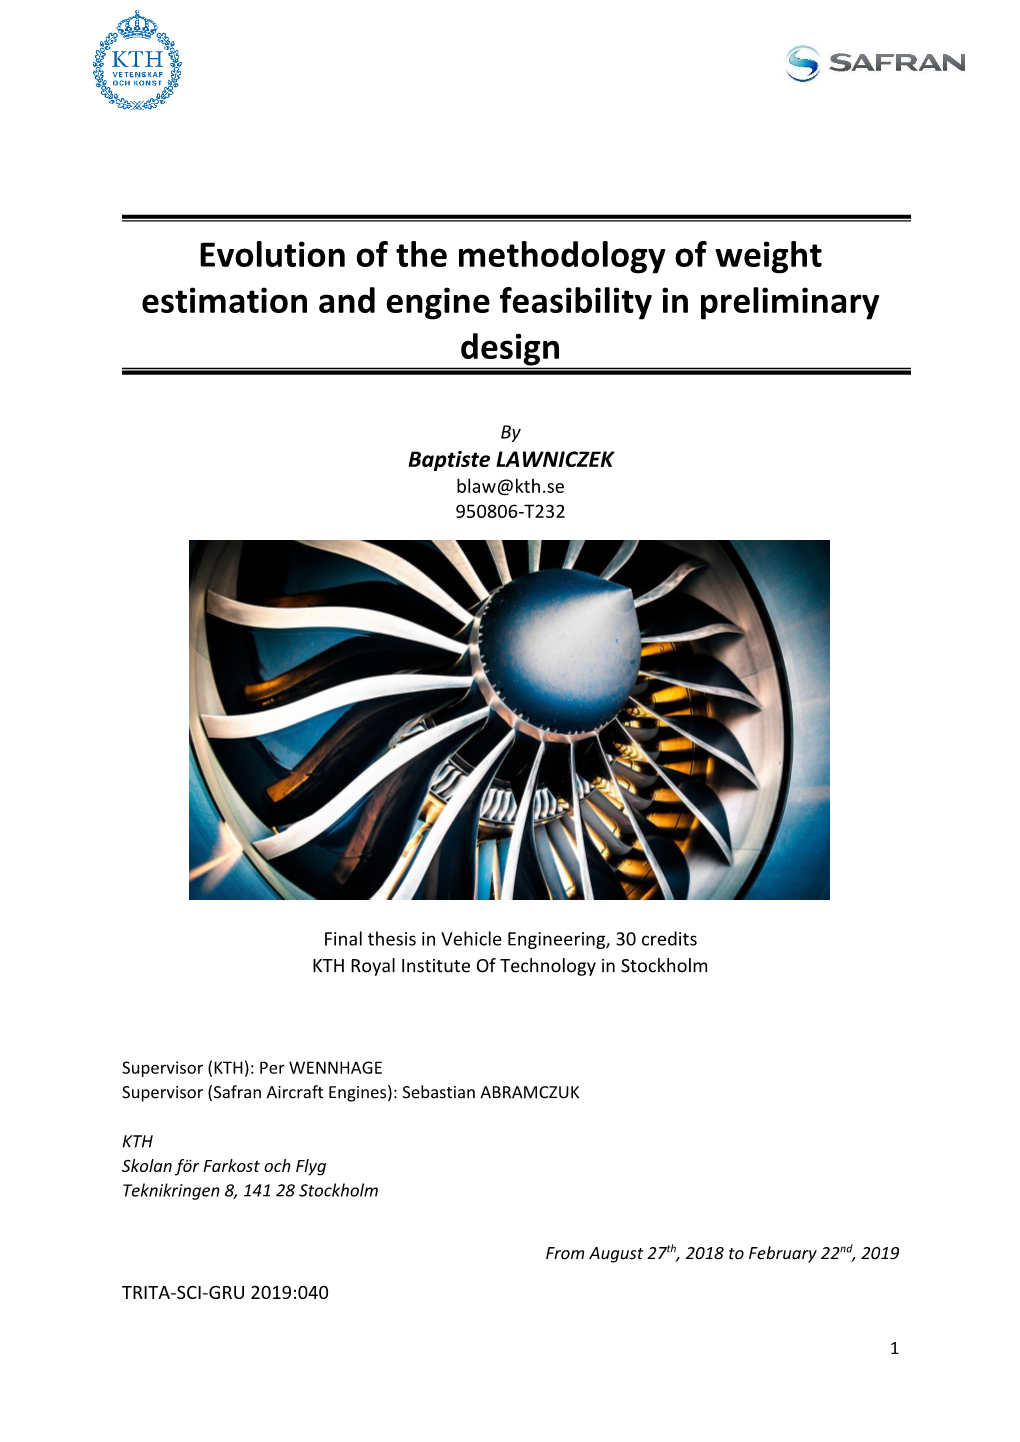 Evolution of the Methodology of Weight Estimation and Engine Feasibility in Preliminary Design